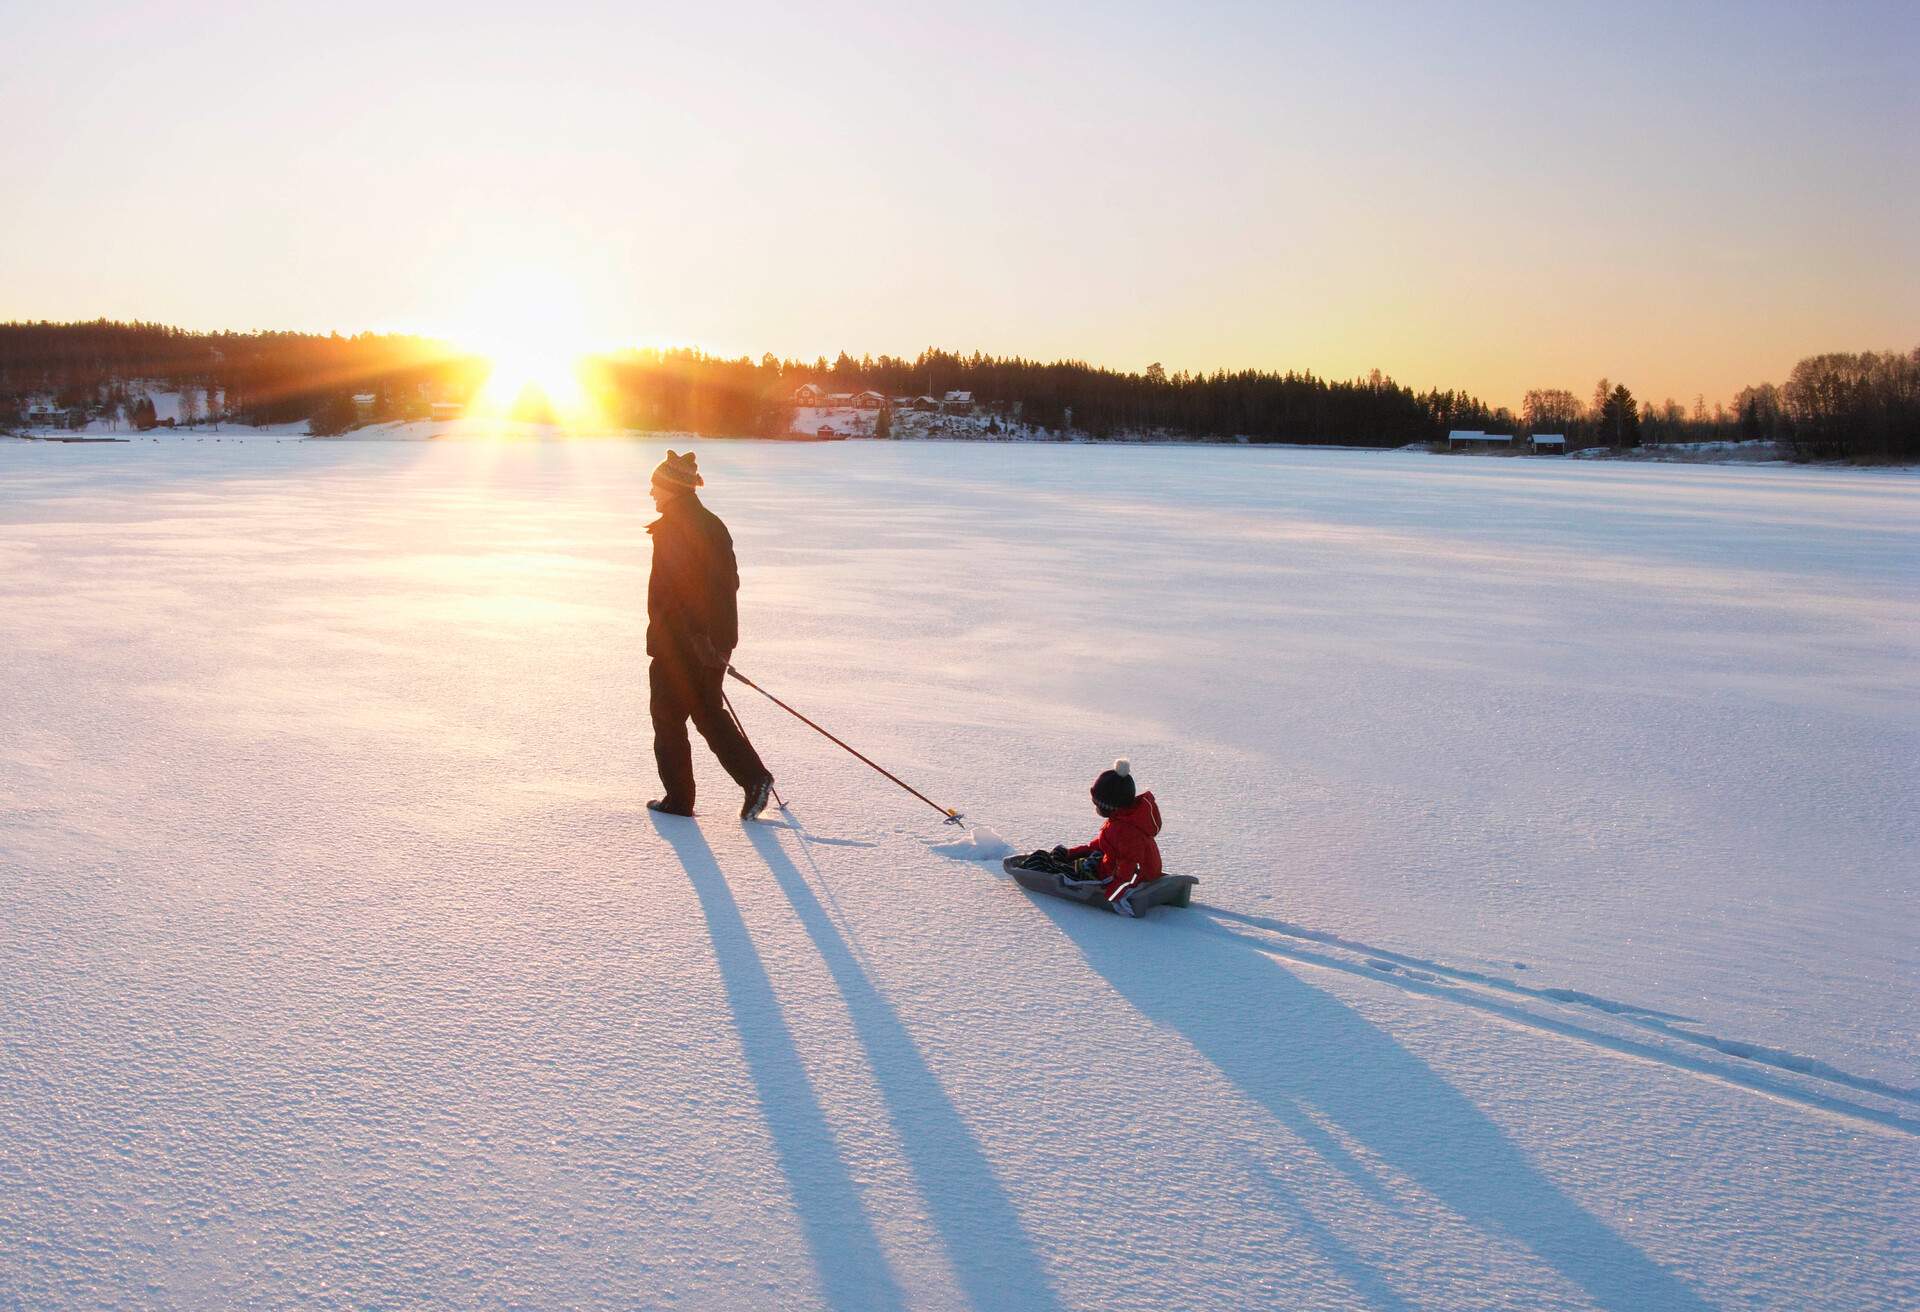 The sun shines on a man pulling a boy on a sled in a snow field.